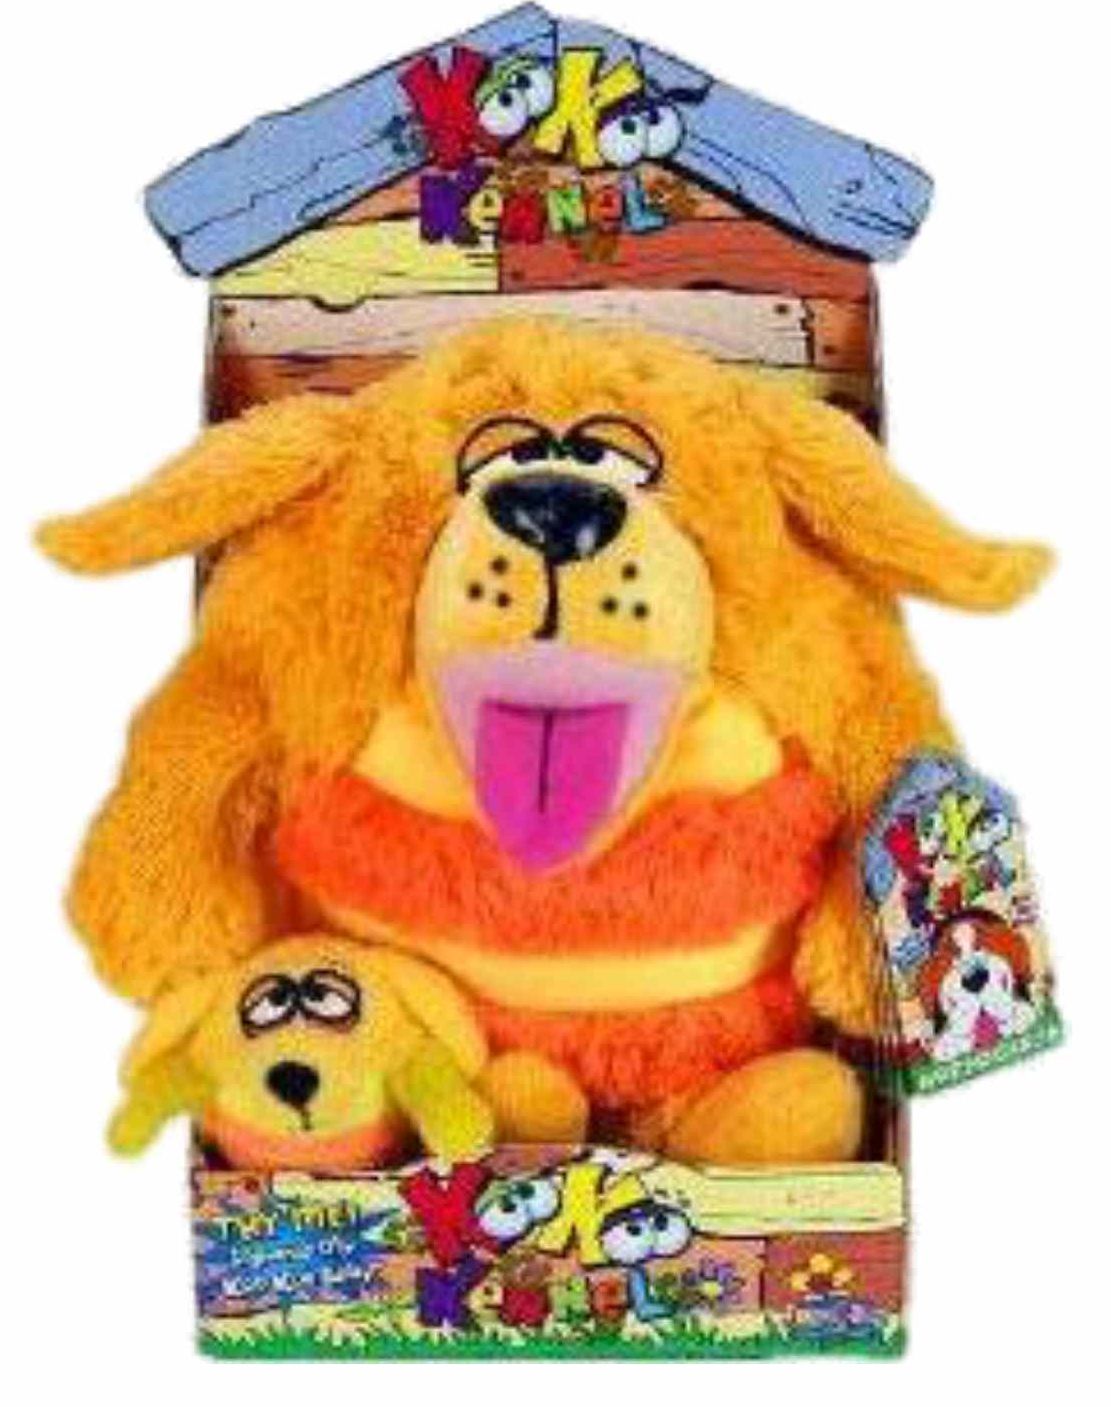 Jay at Play KooKoo Kennel Barking Plush with Mini Puppy Dog - Golden Fetcher Stuffed Animal